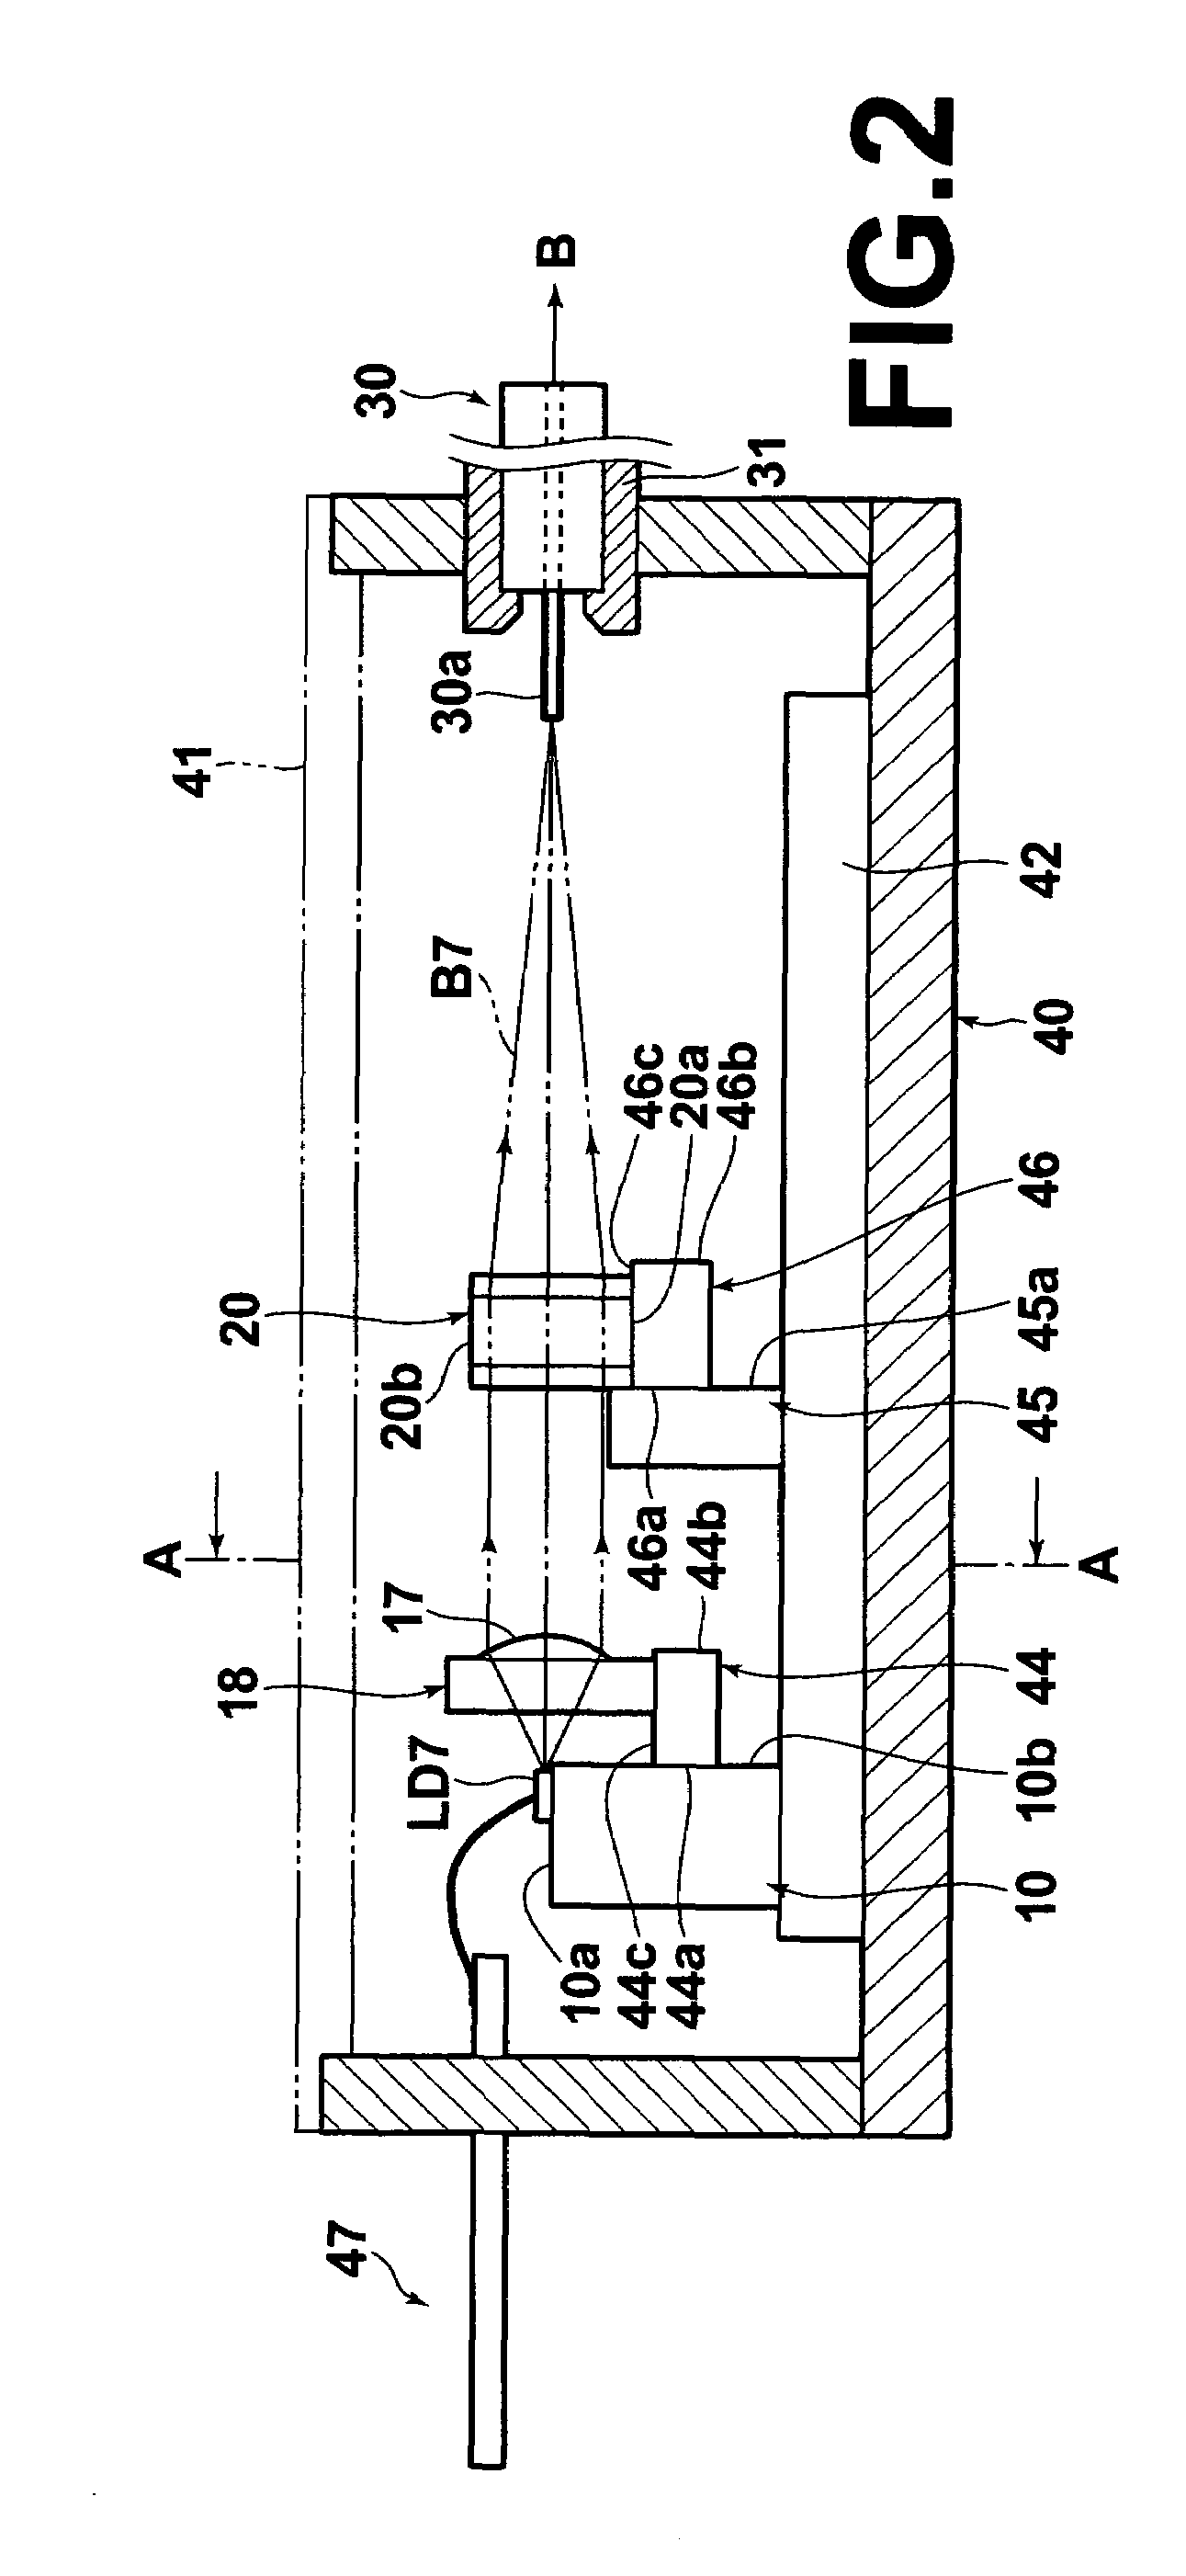 Laser apparatus and method for assembling the laser apparatus